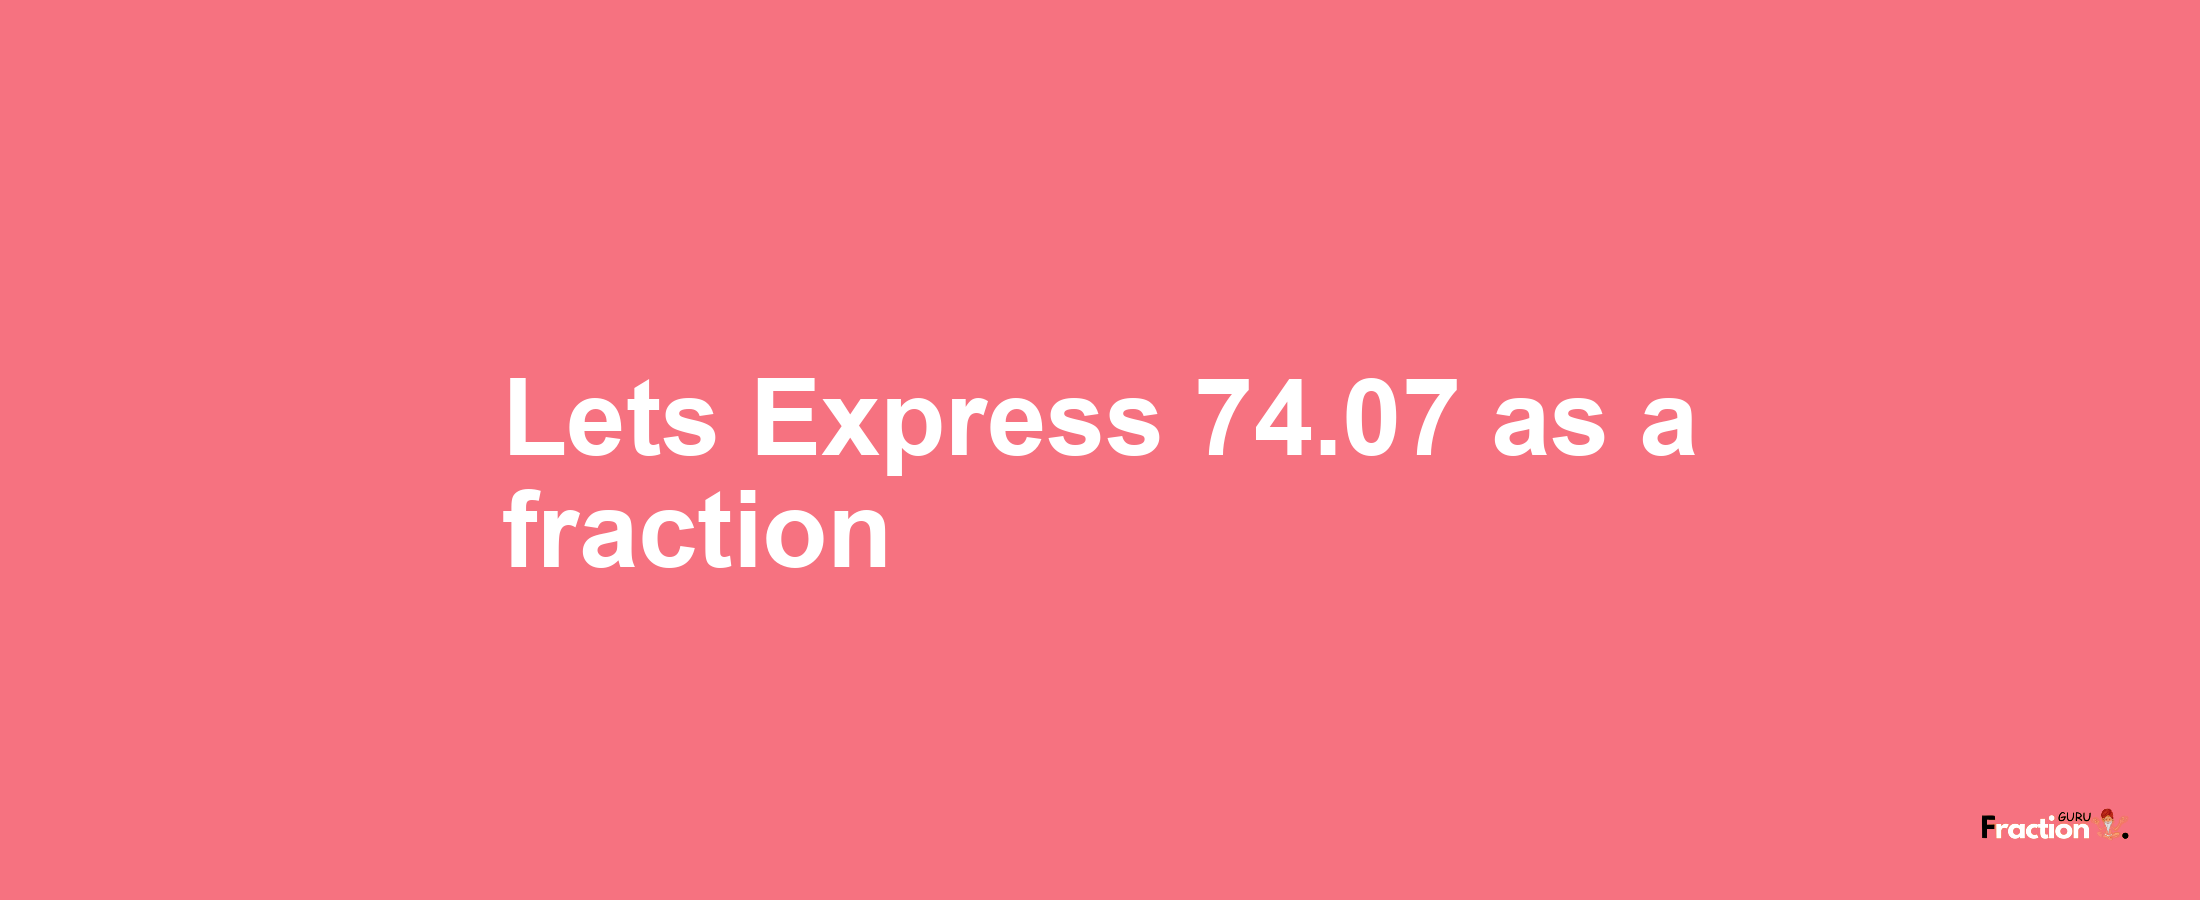 Lets Express 74.07 as afraction